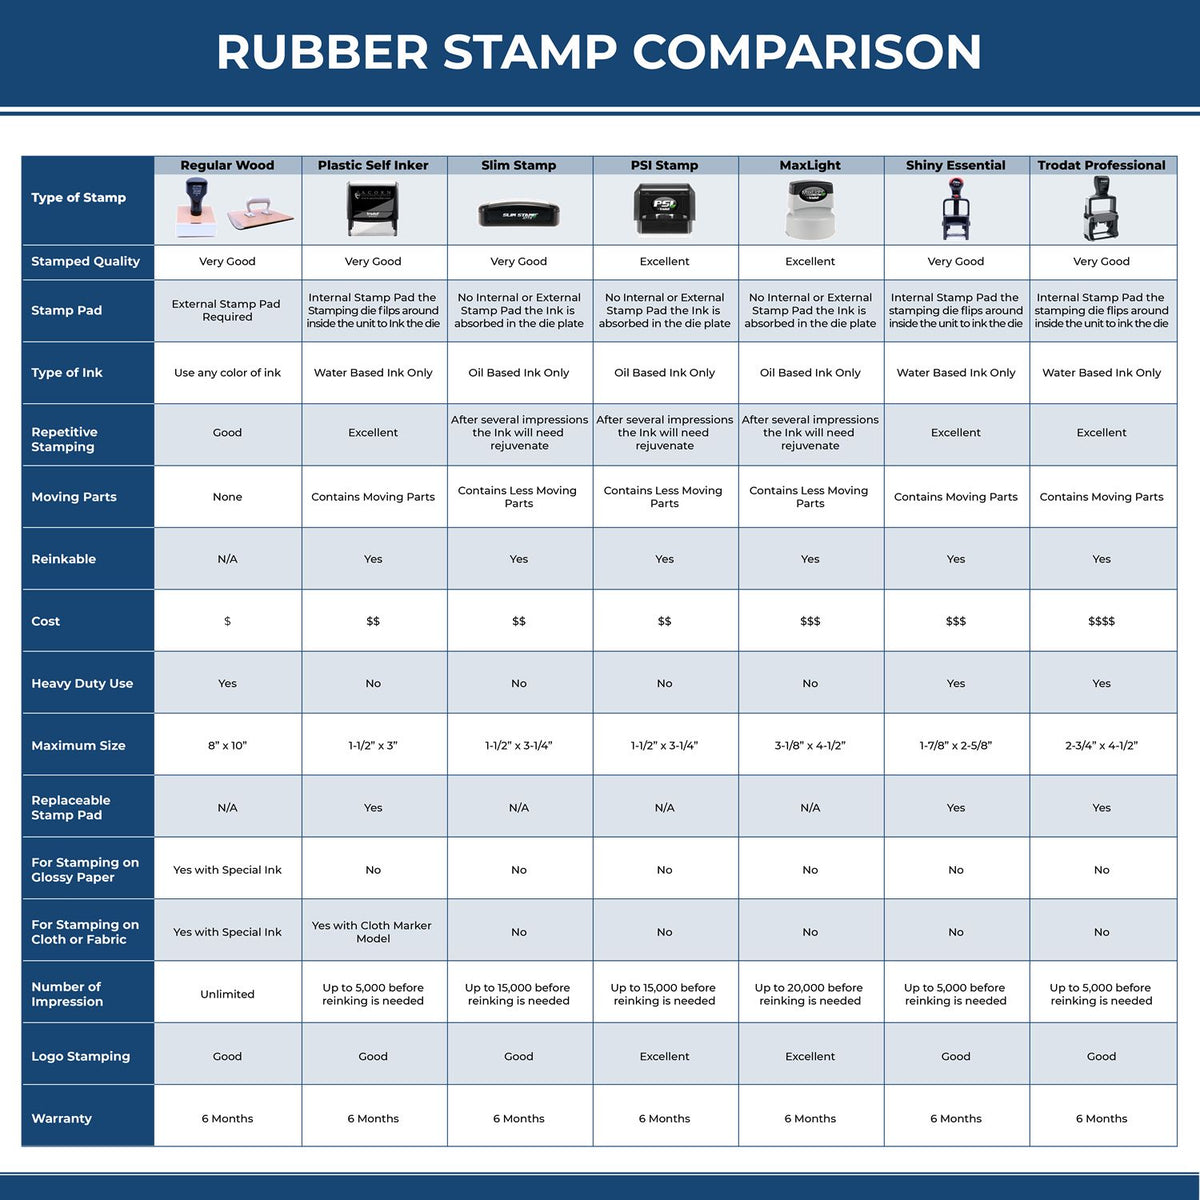 Large Self Inking Amazing Stamp 4675S Rubber Stamp Comparison